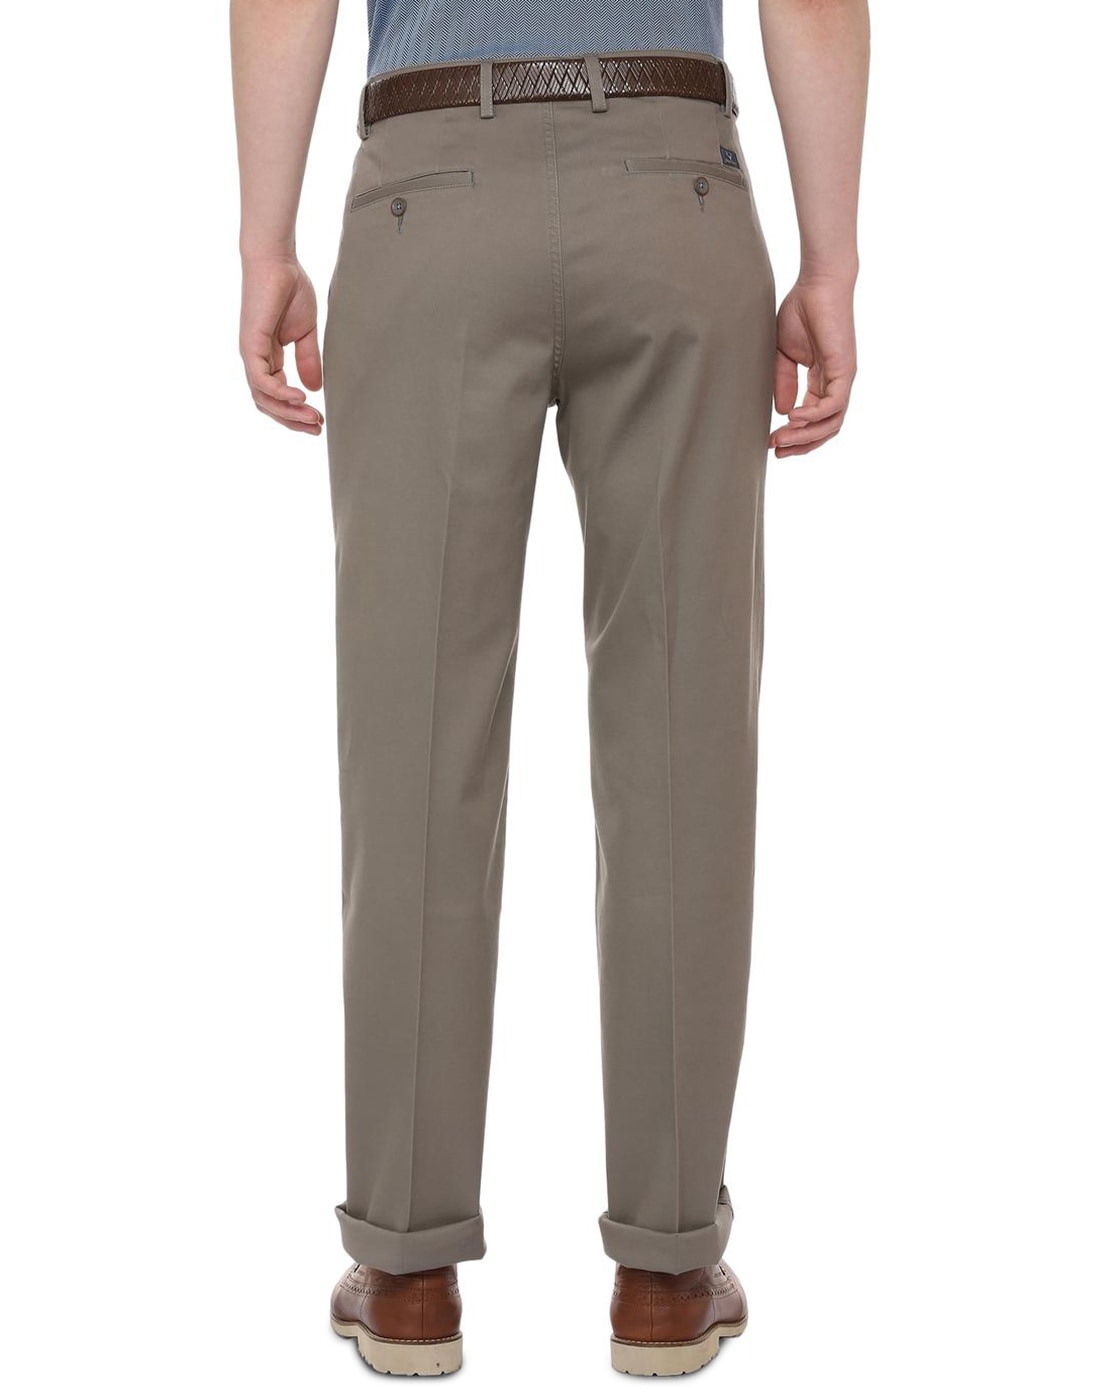 Buy Allen Solly Women Beige Slim fit Regular trousers Online at Low Prices  in India - Paytmmall.com